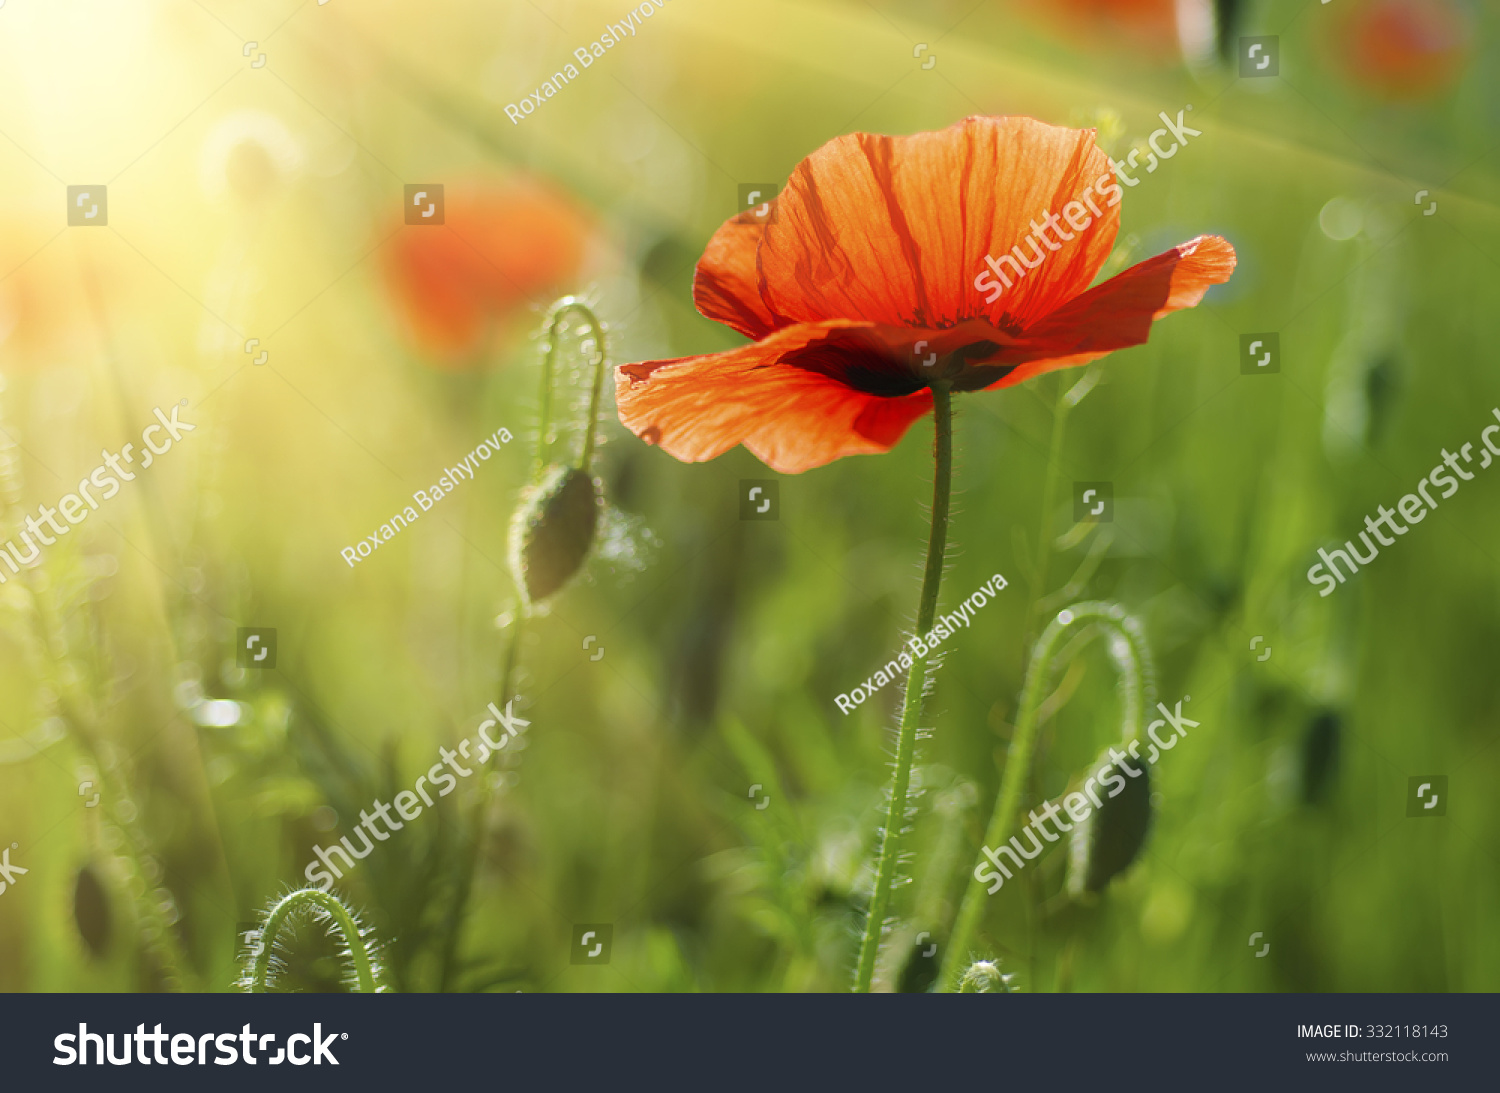 Red poppy in a green grass field with sunlight, natural floral vintage background #332118143